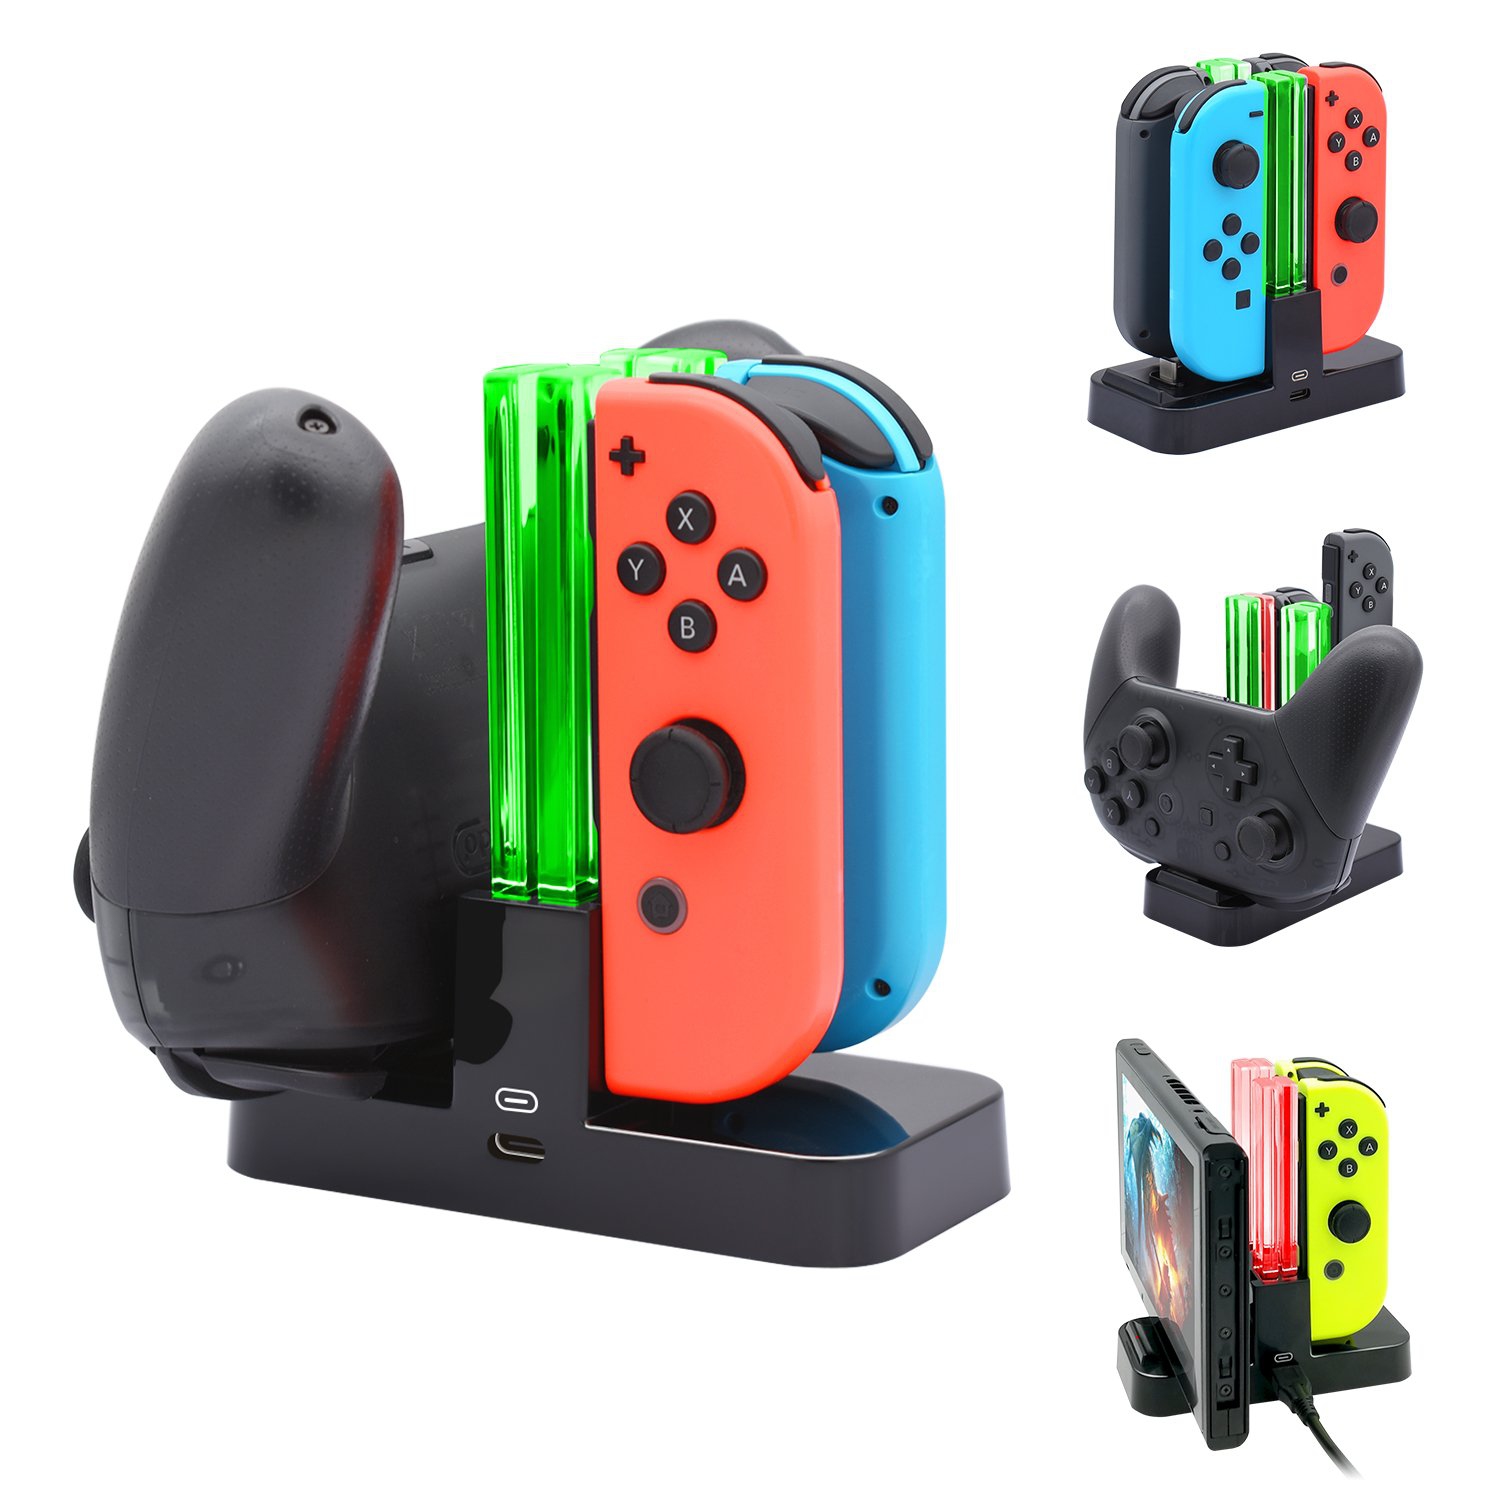 FastSnail Controller Charger for Nintendo Switch, Pro Controller and Joy-con Charging Dock for Nintendo Switch with Charging